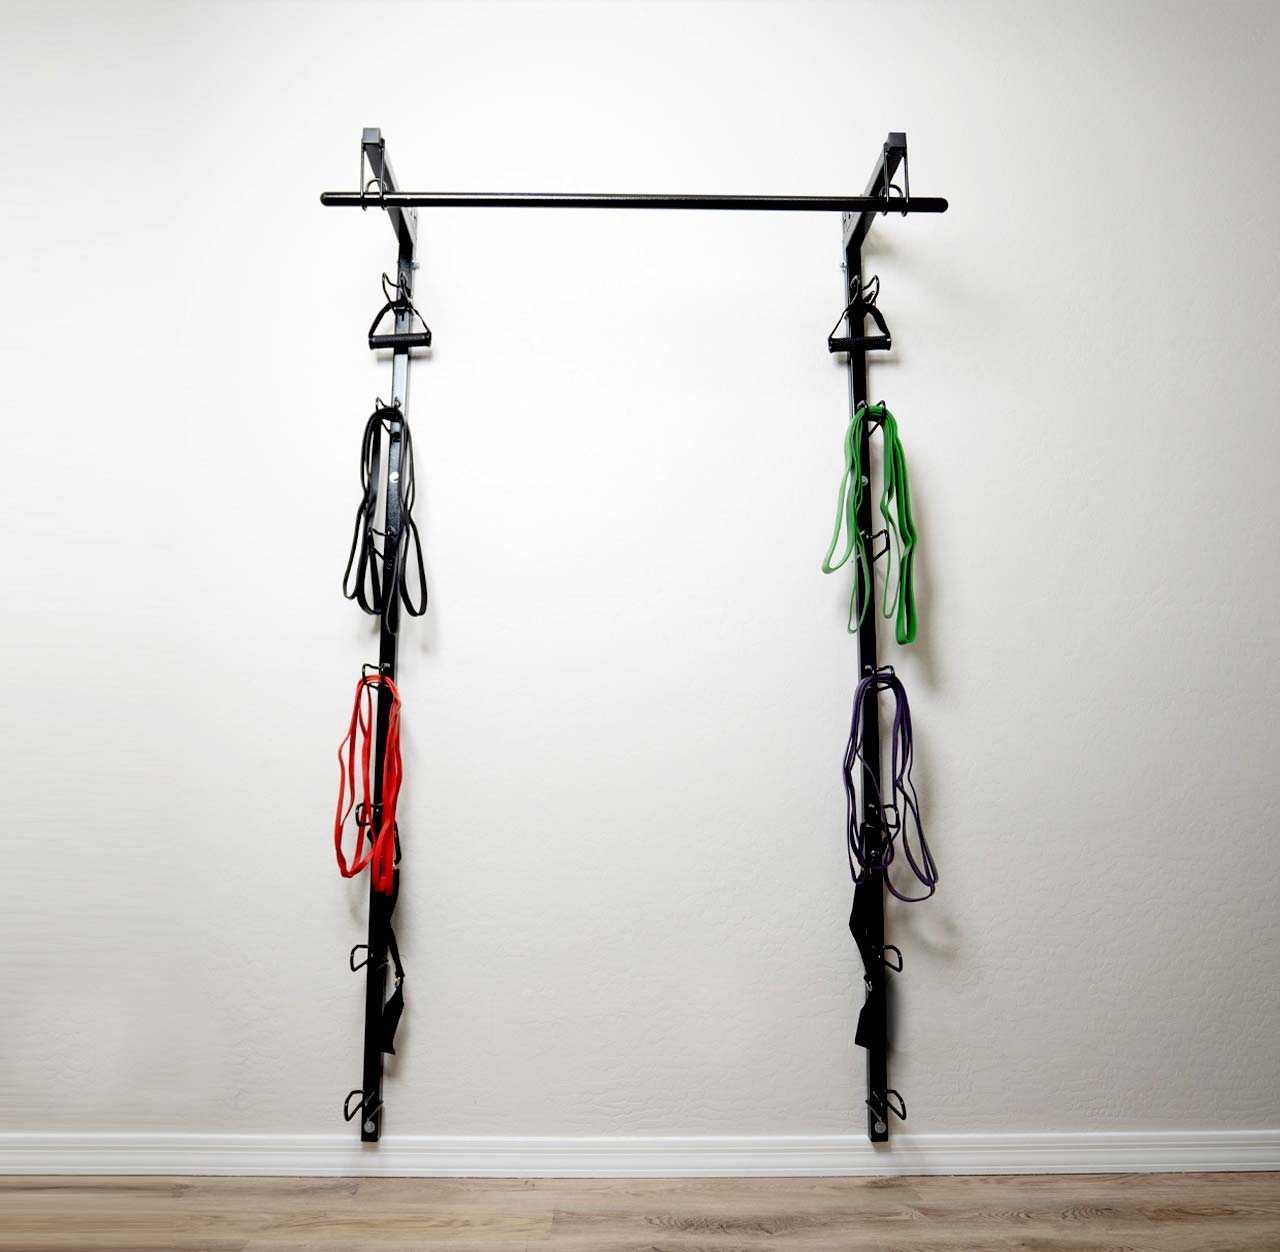 Small Home Gyms: The HomeStrong Fitness System - Your Ideal Solution for Convenience and Health